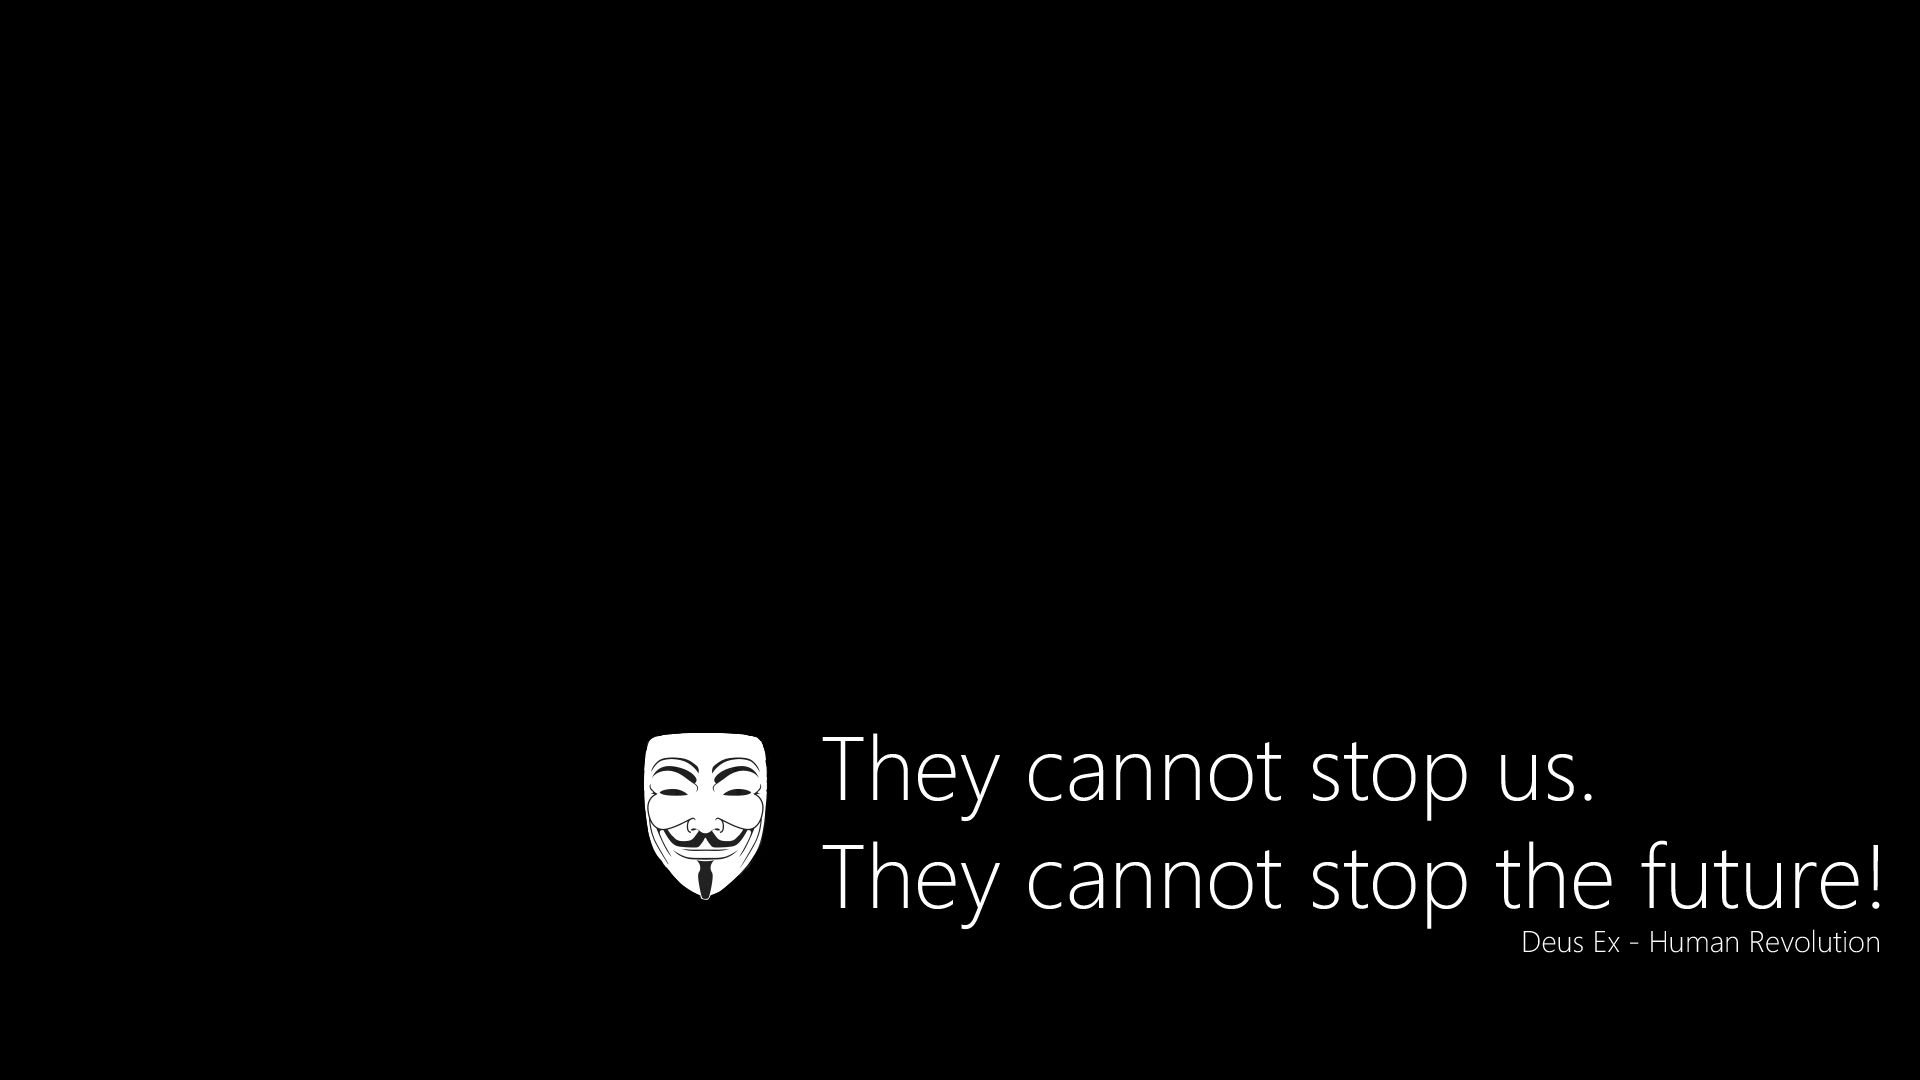 Anonymous Hackers Quotes. QuotesGram